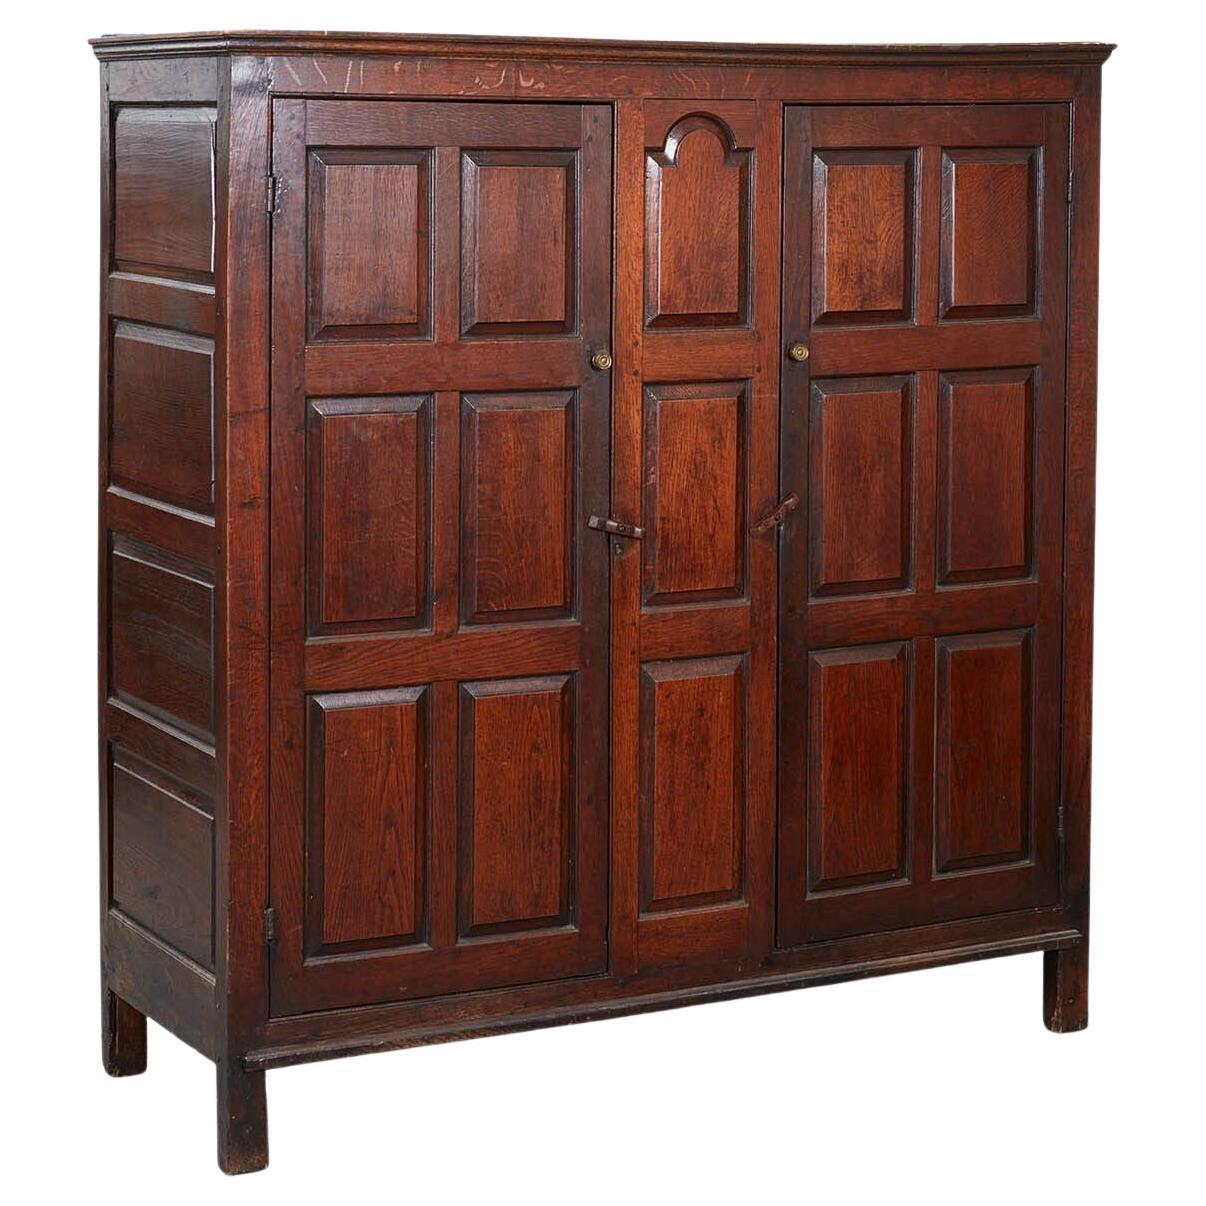 English Country House Cupboard For Sale